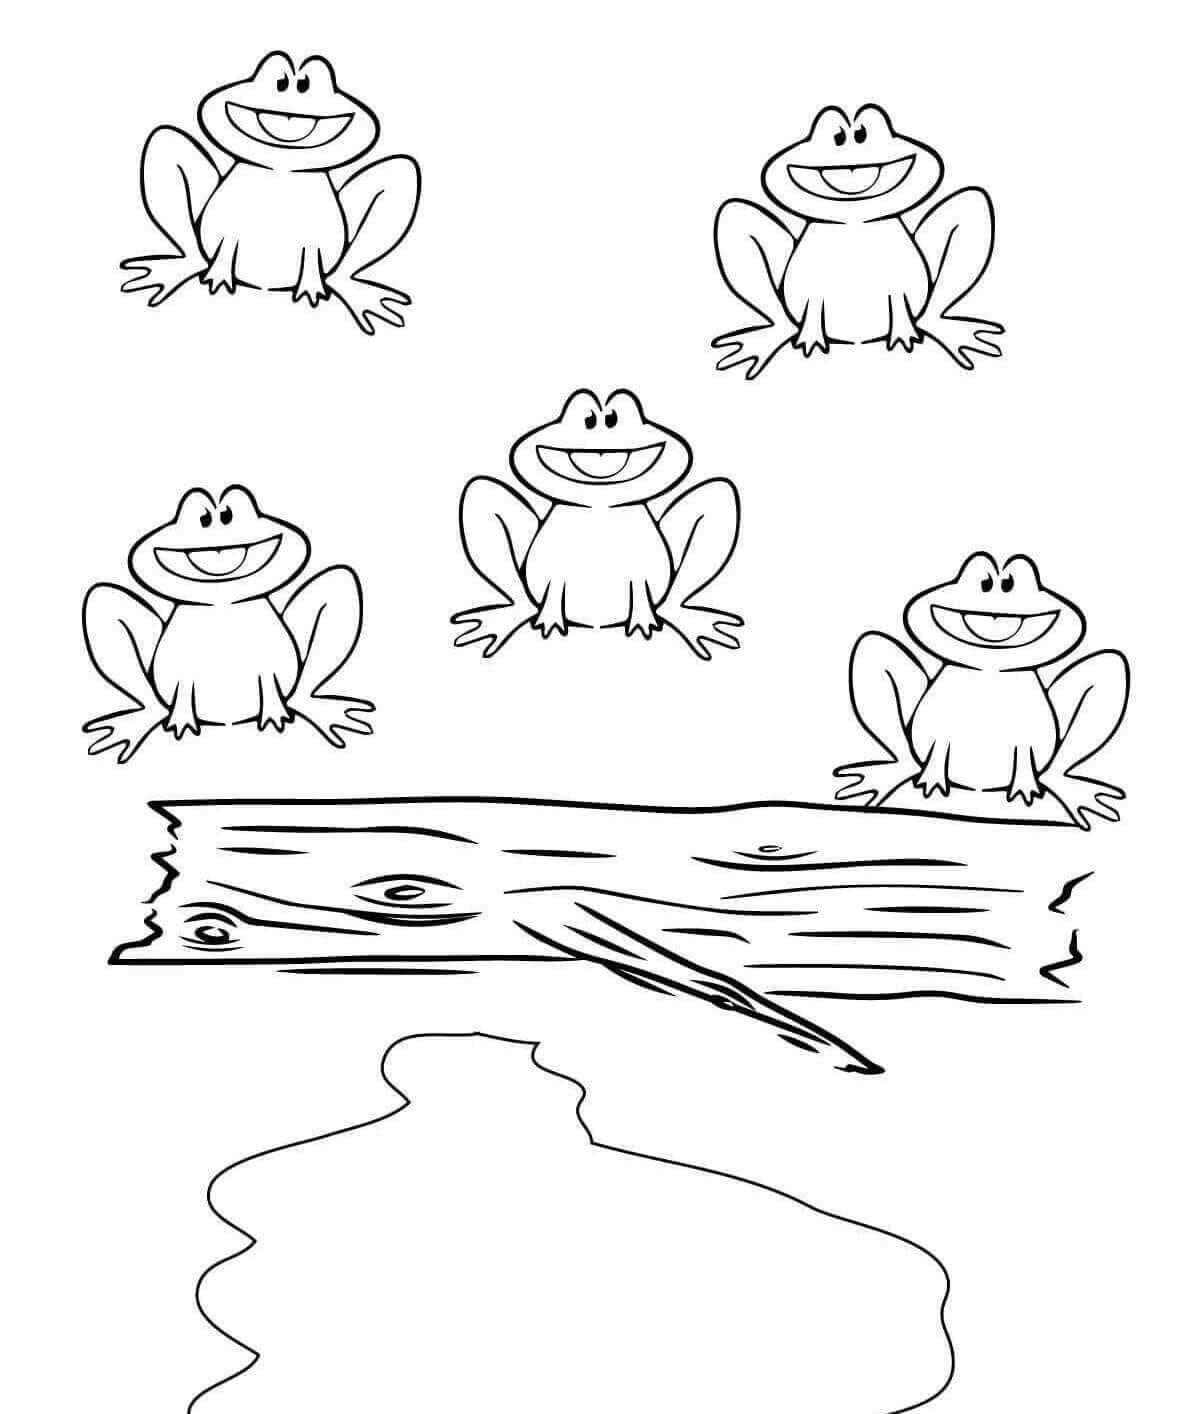 Frog Family Coloring Page